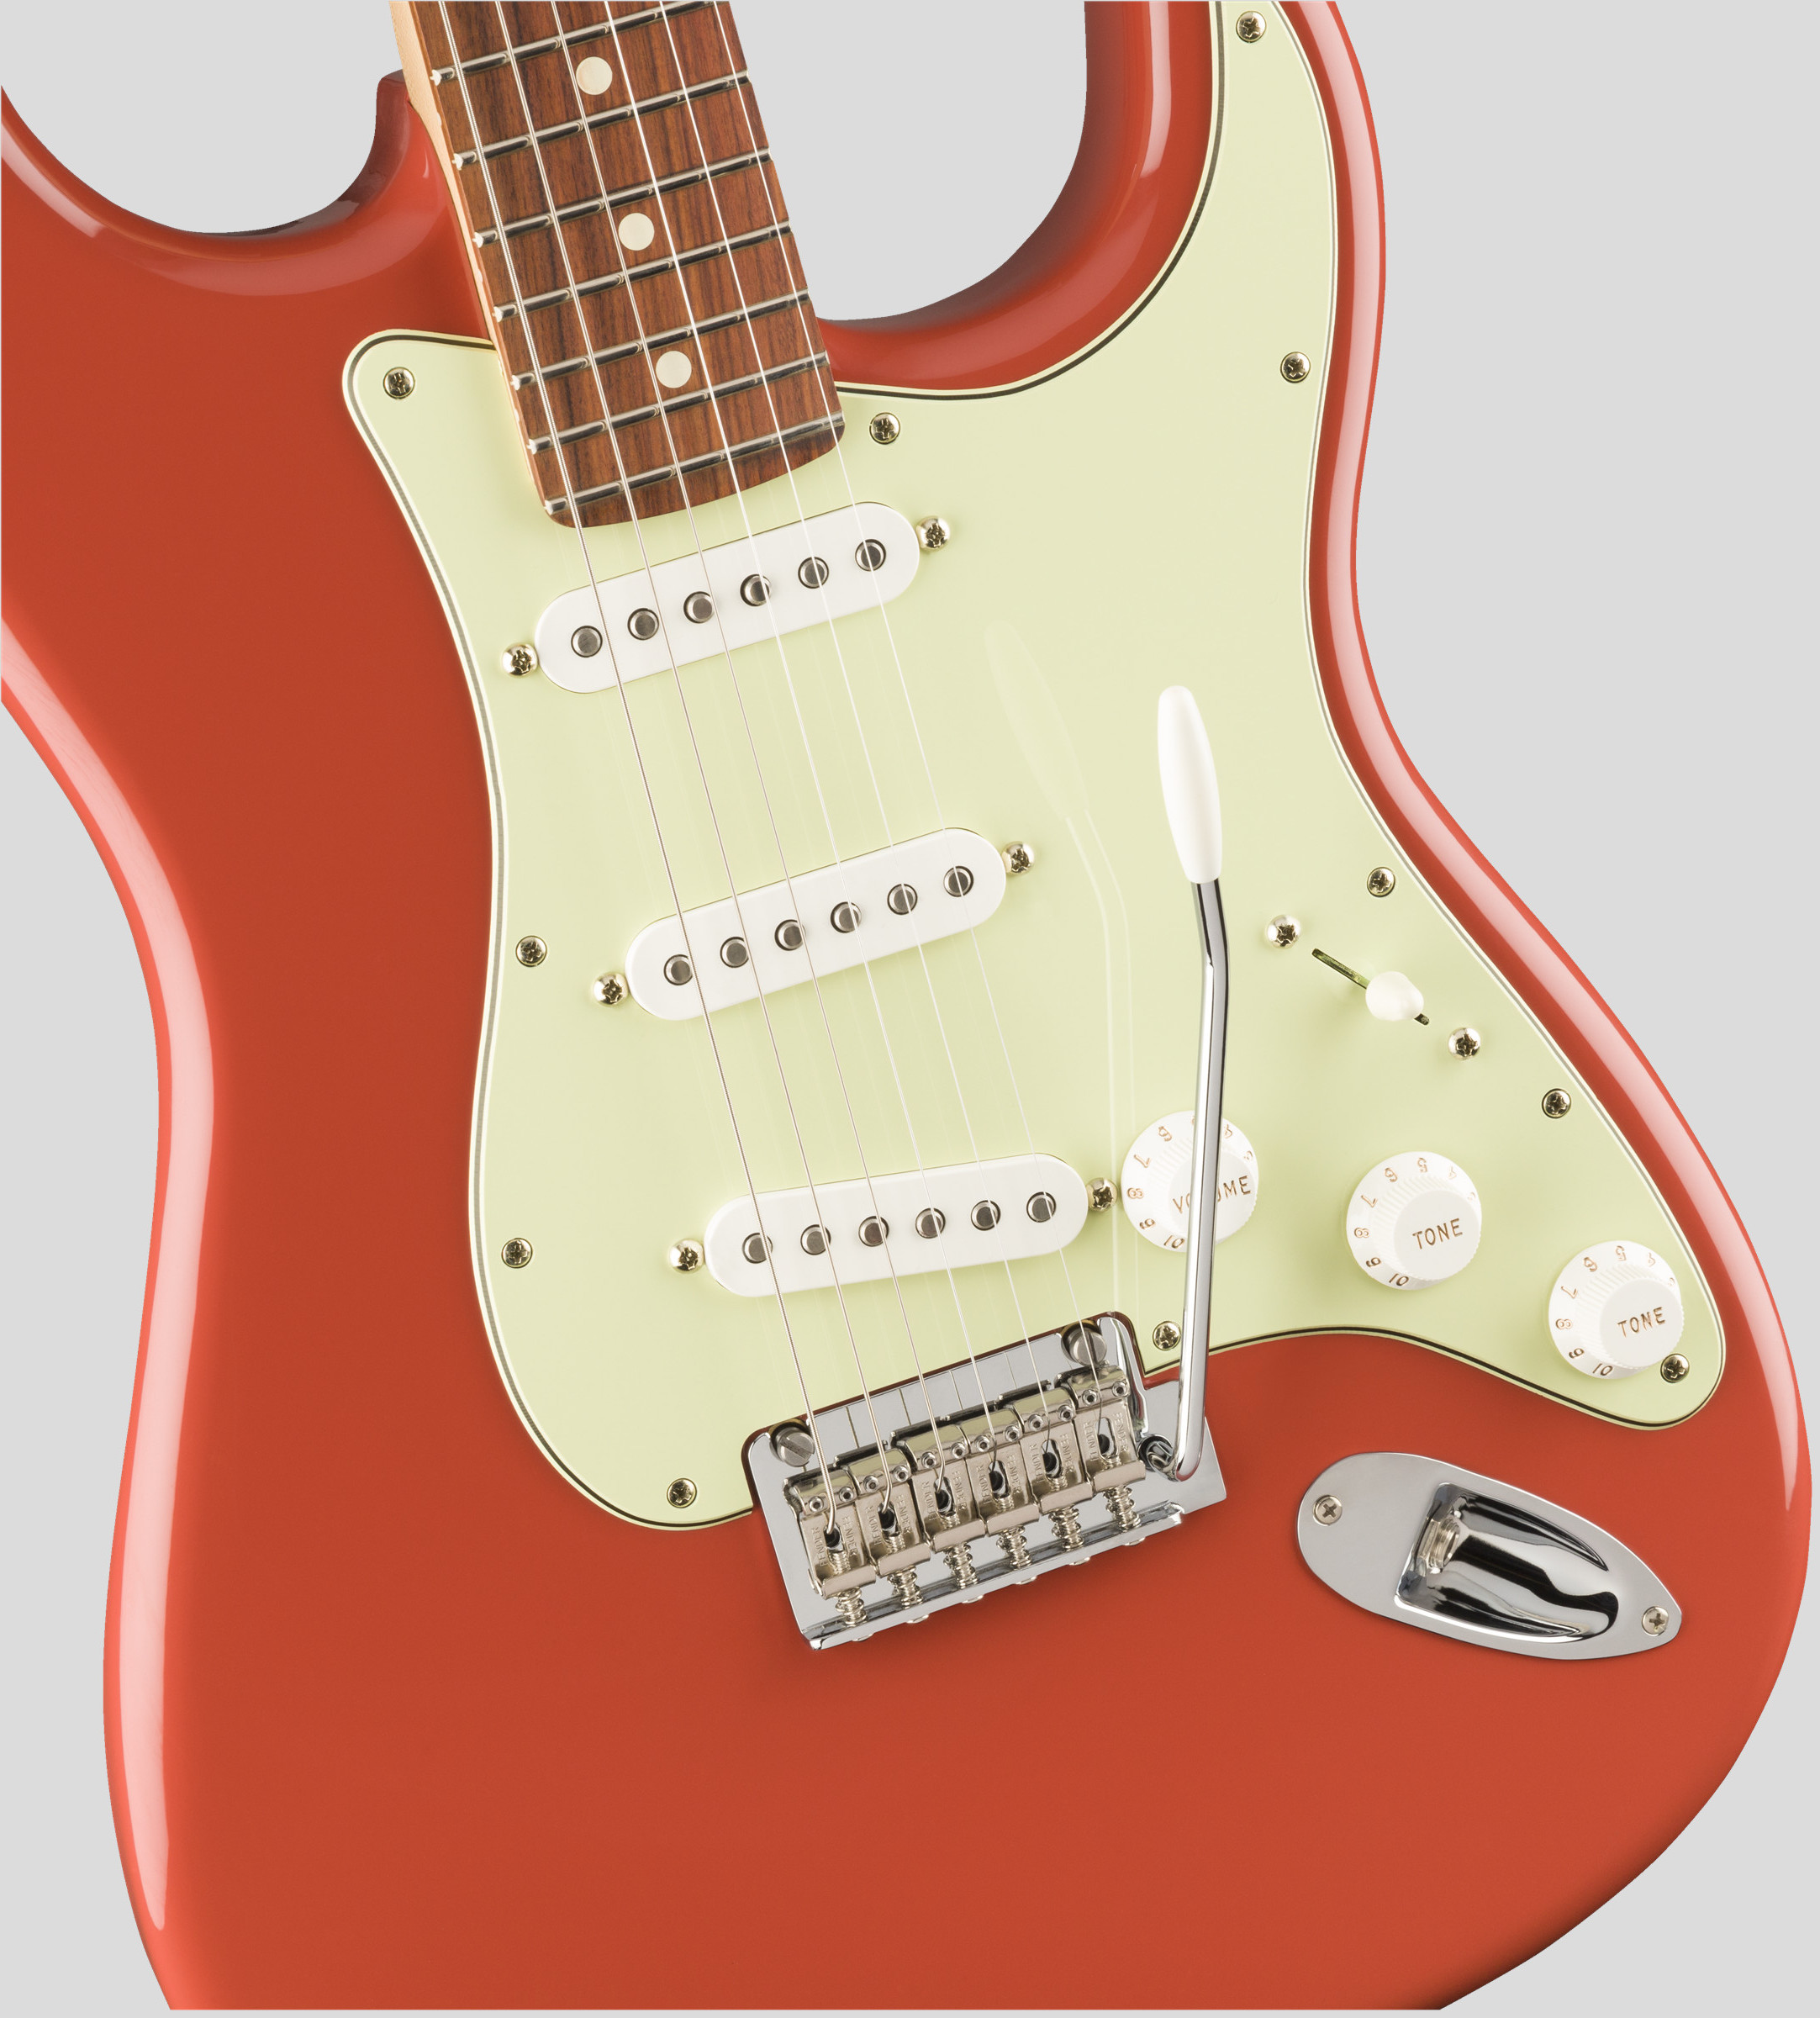 Fender Limited Edition Player Stratocaster Fiesta Red 4